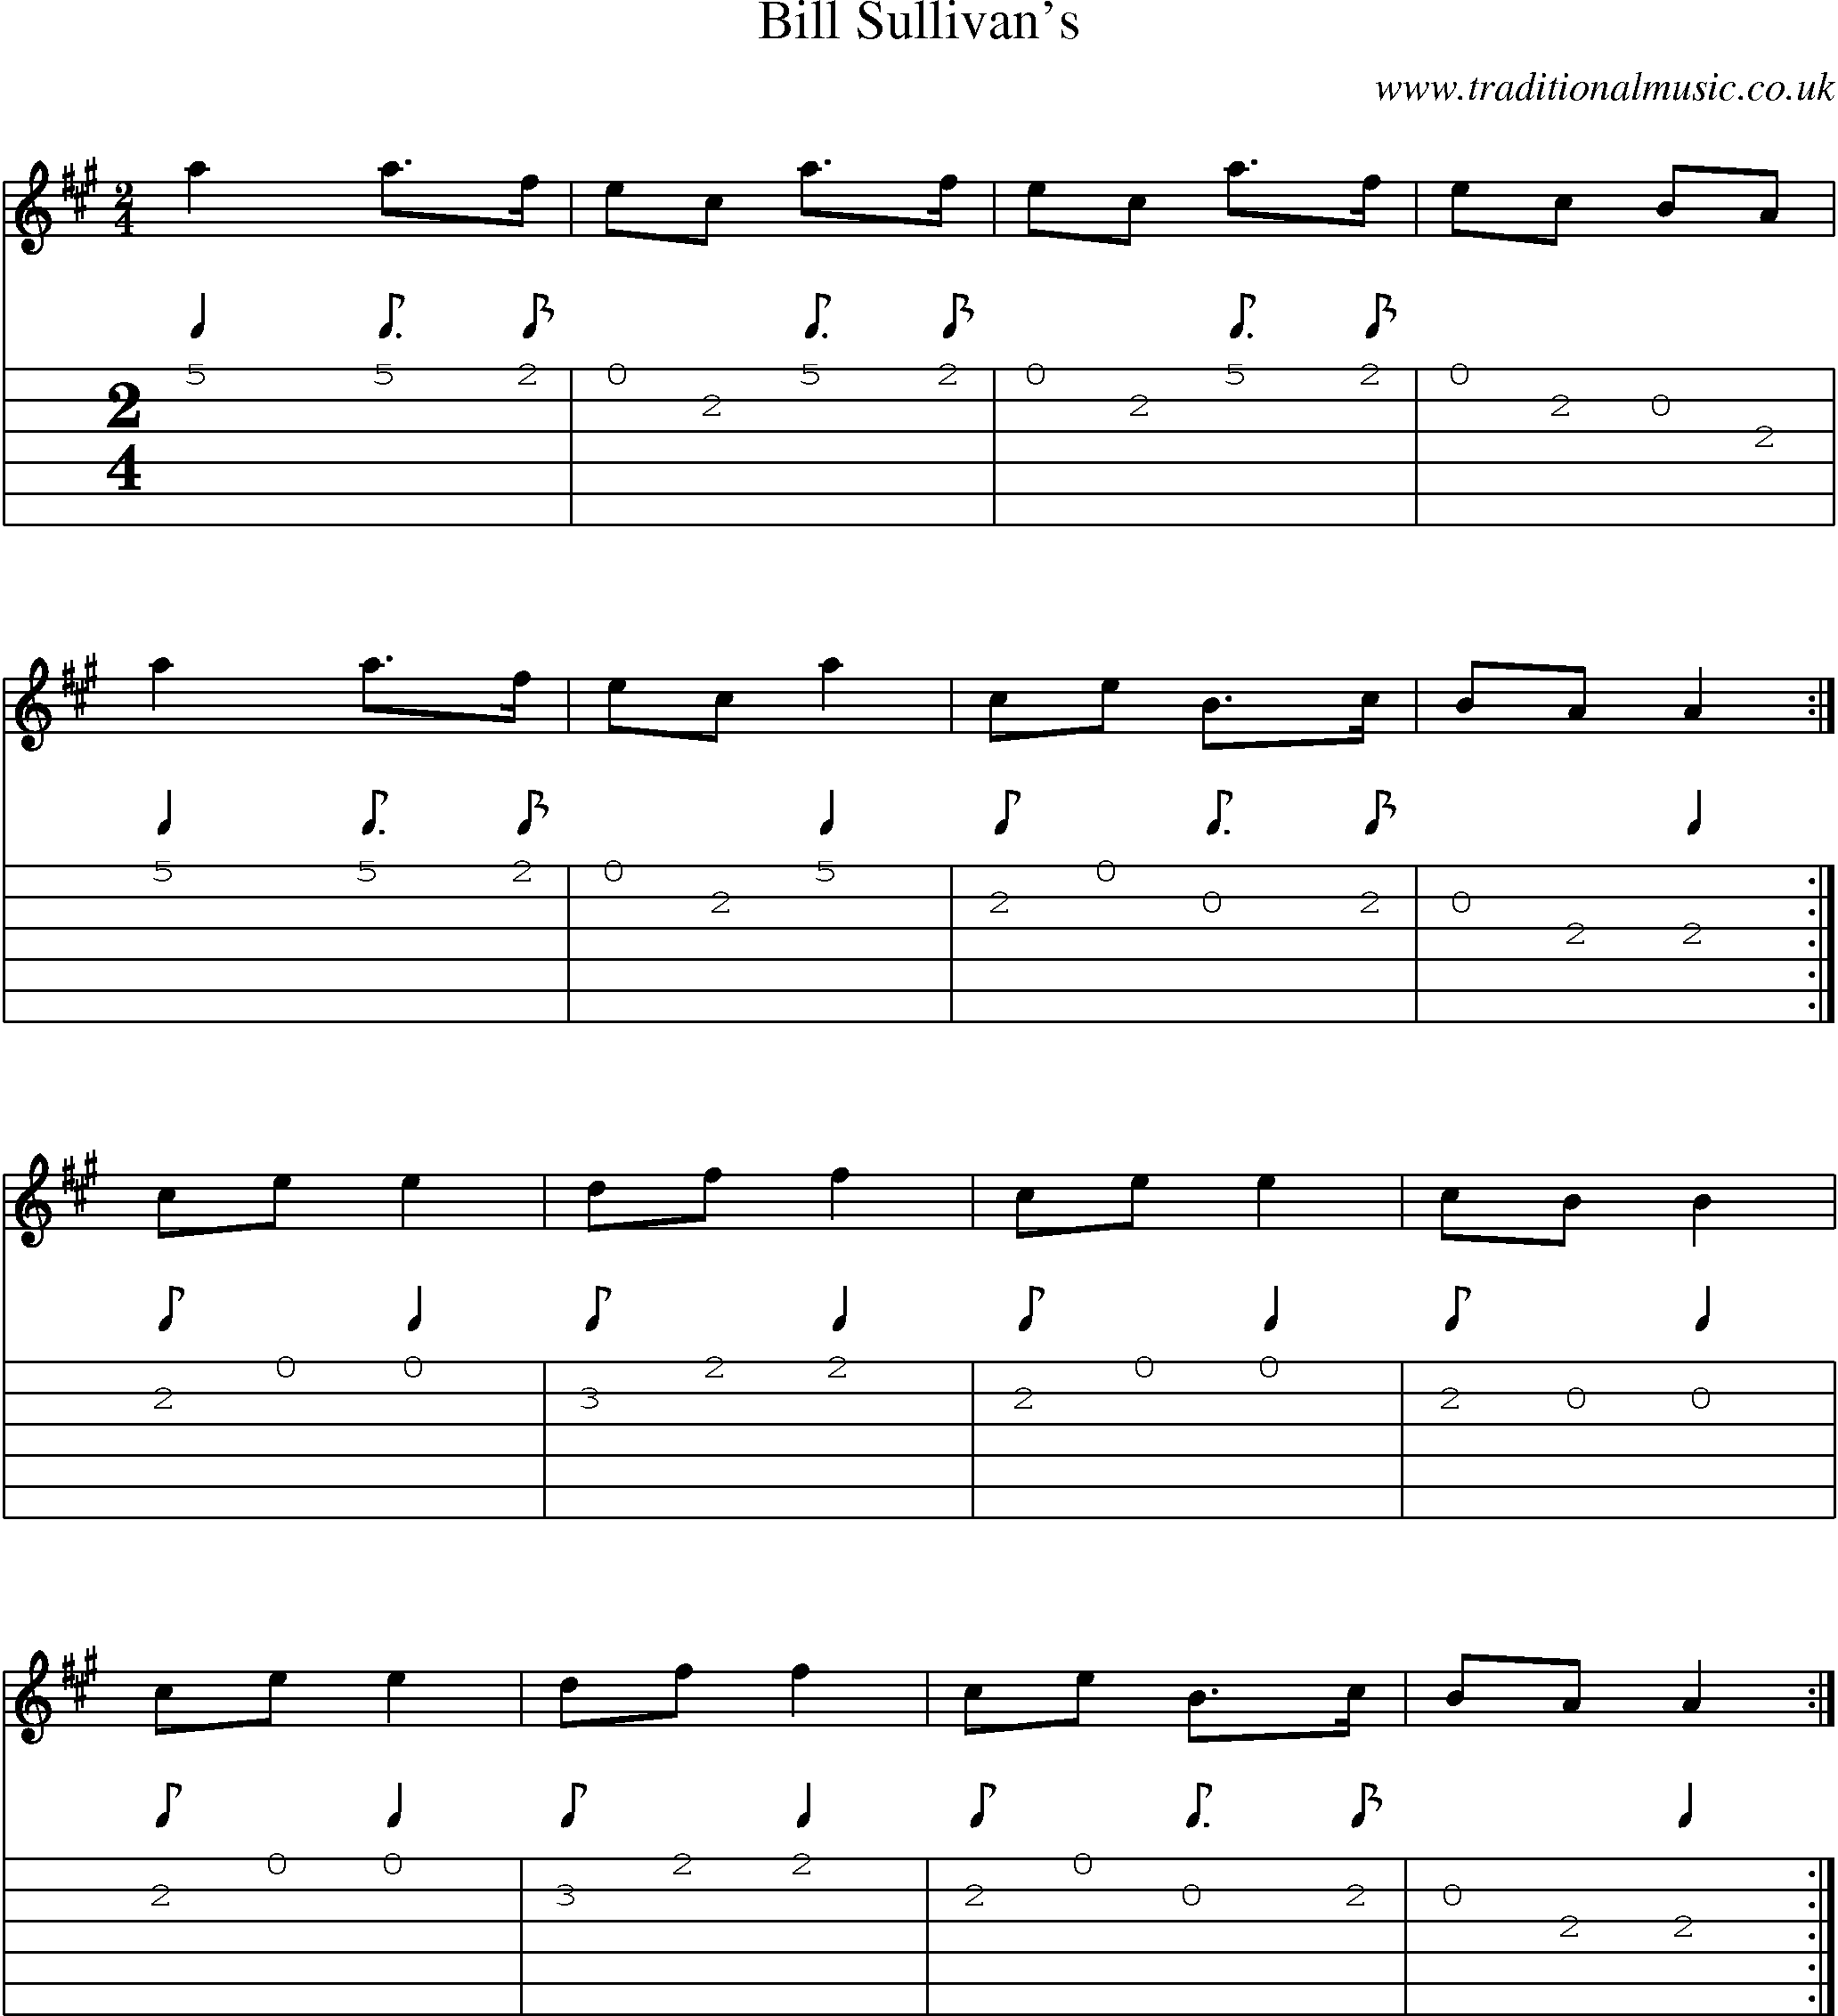 Music Score and Guitar Tabs for Bill Sullivans